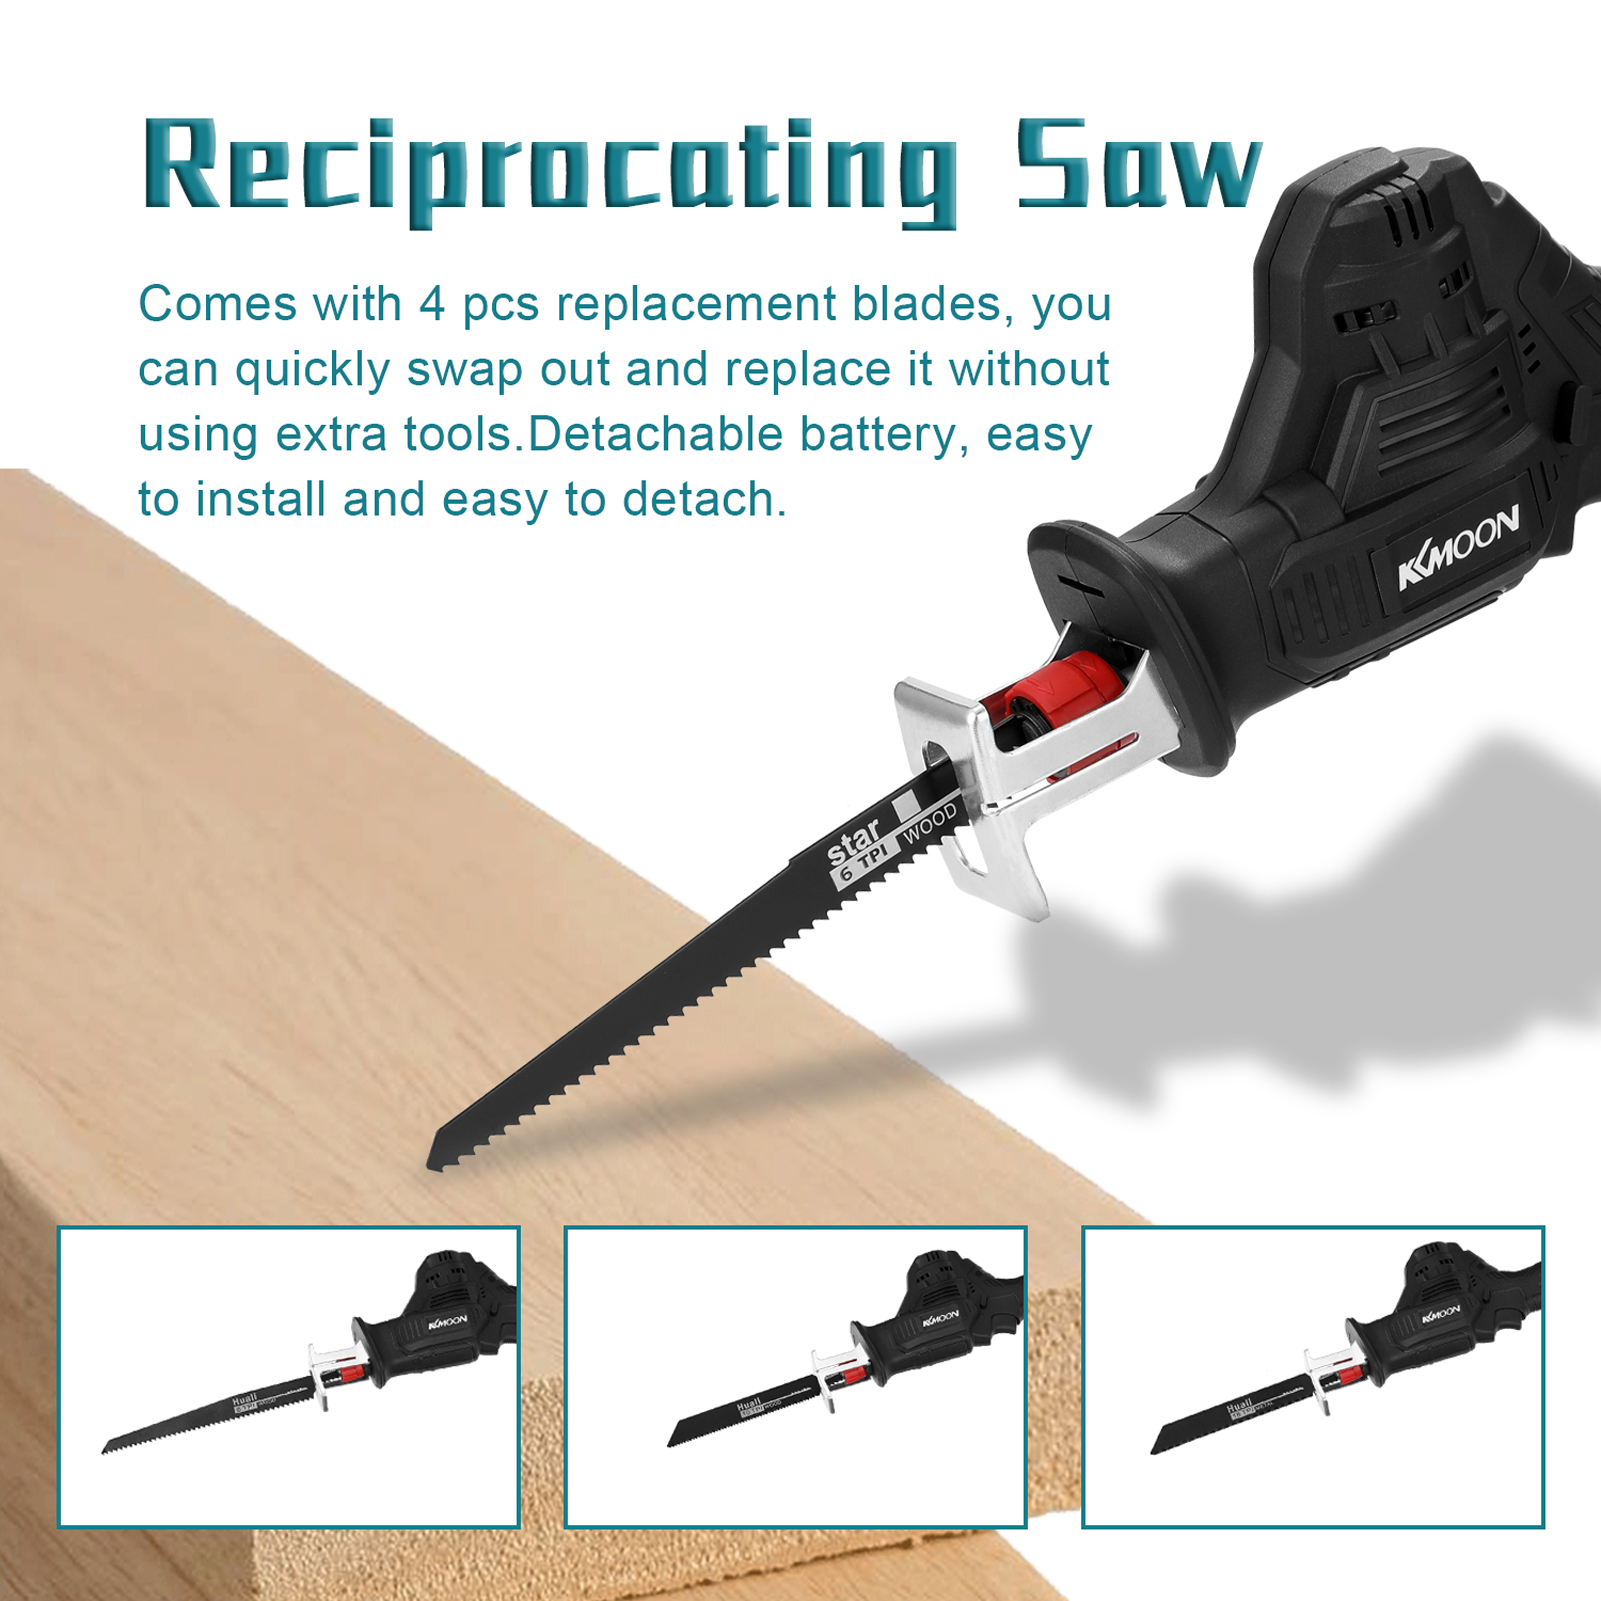 12V Reciprocating Saw Electric Saw Wood Cutter Machine With Blades Battery for Wood Sheet Cutting Portable Saber Saw Power Tools